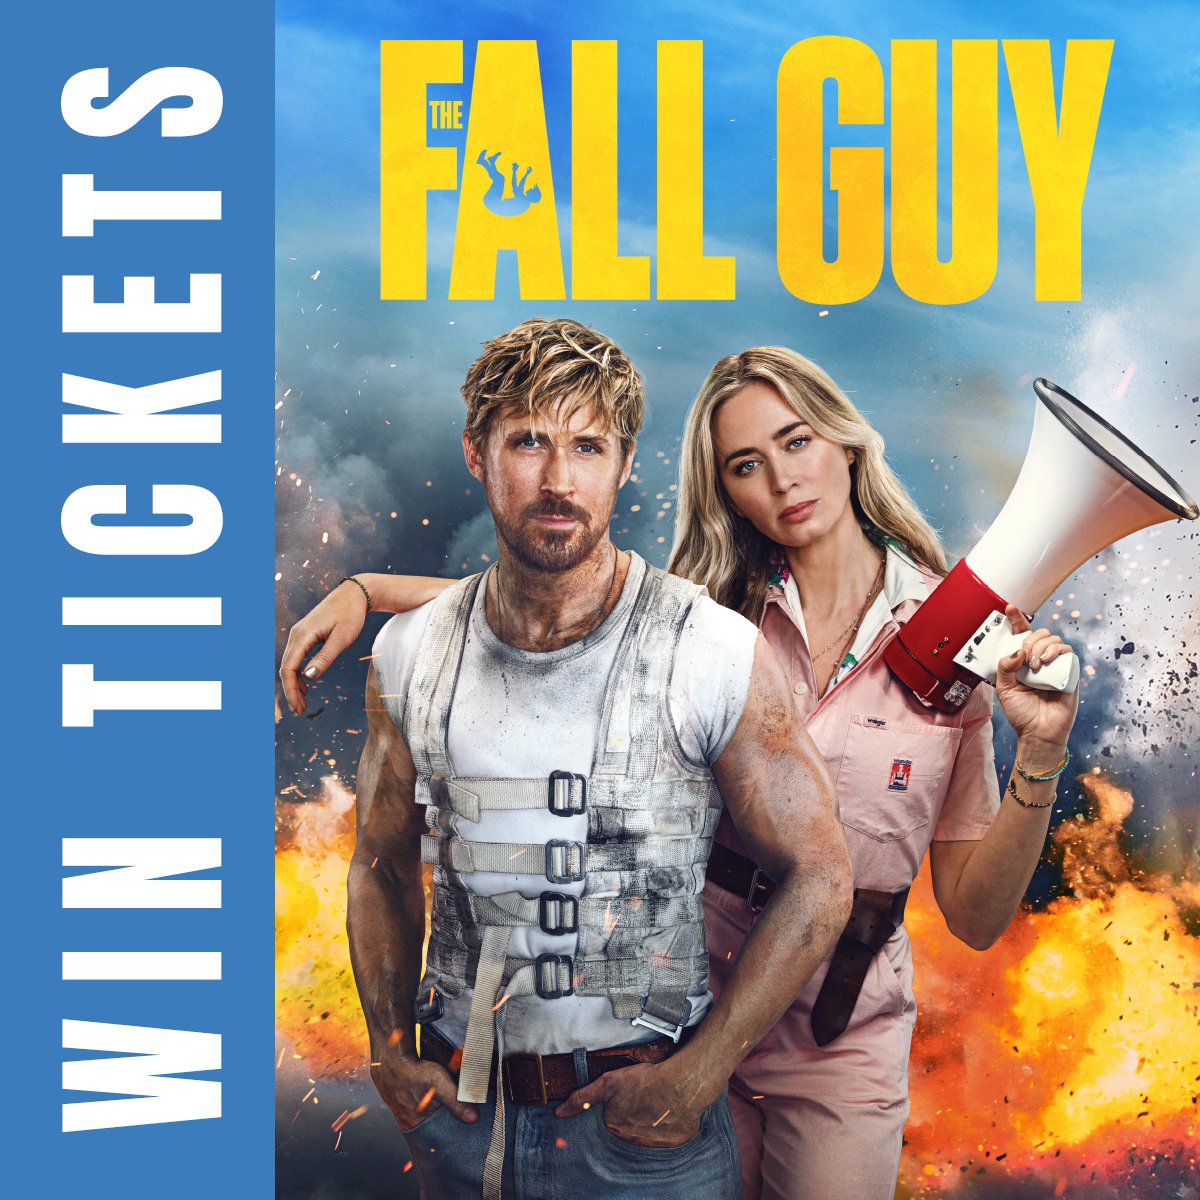 WIN a pair of tickets to a special preview screening of #TheFallGuyMovie followed by an evening with cocktails & karaoke! All you need to do is follow us, like this post and tag the person you'd want to be your stunt double! 📍 Light House Cinema. 🗓 Tuesday, 30/4. ⏰ 6 pm.